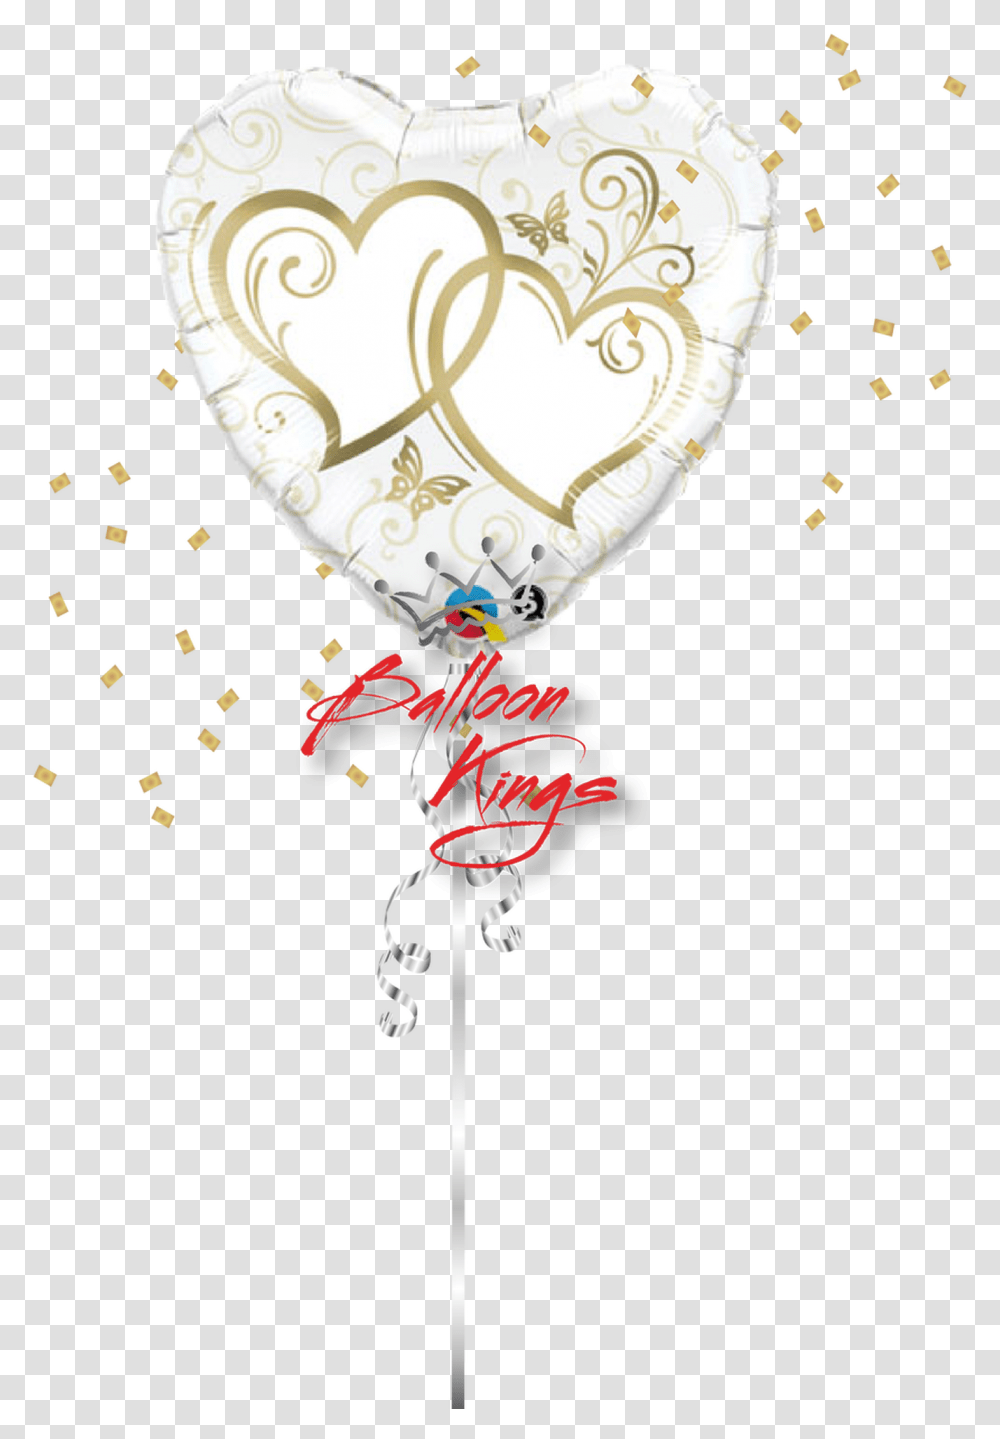 Entwined Gold Hearts Qualatex Balloon Bouquets Wedding, Paper, Confetti, Pattern Transparent Png